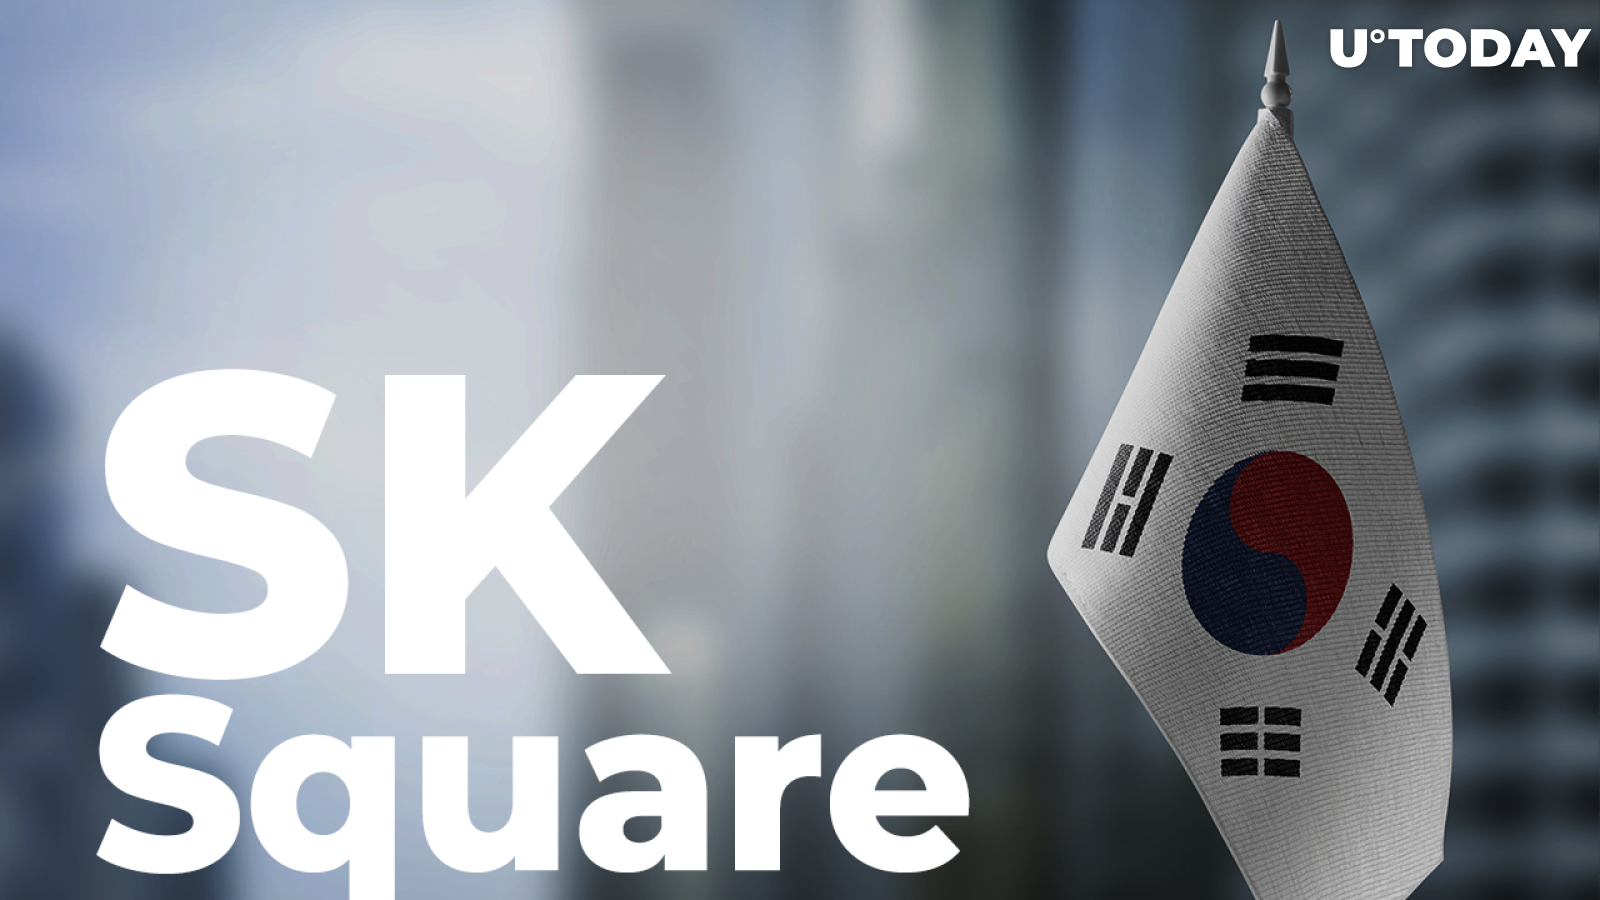 South Korean Investment Giant SK to Issue Crypto to Be Used in Its Own Metaverse: Report